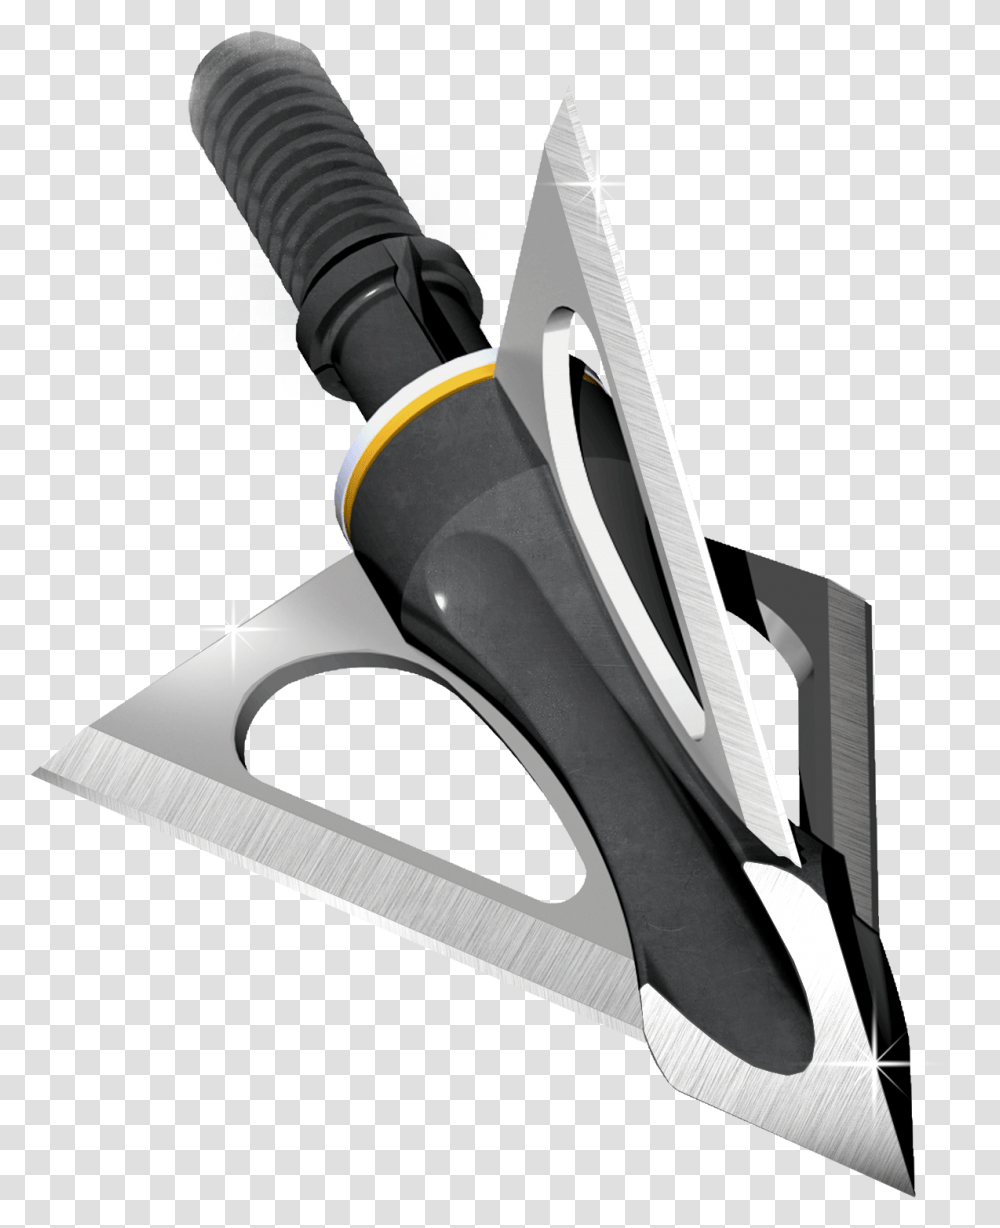 Striker Fixed Broadhead, Appliance, Blade, Weapon, Weaponry Transparent Png